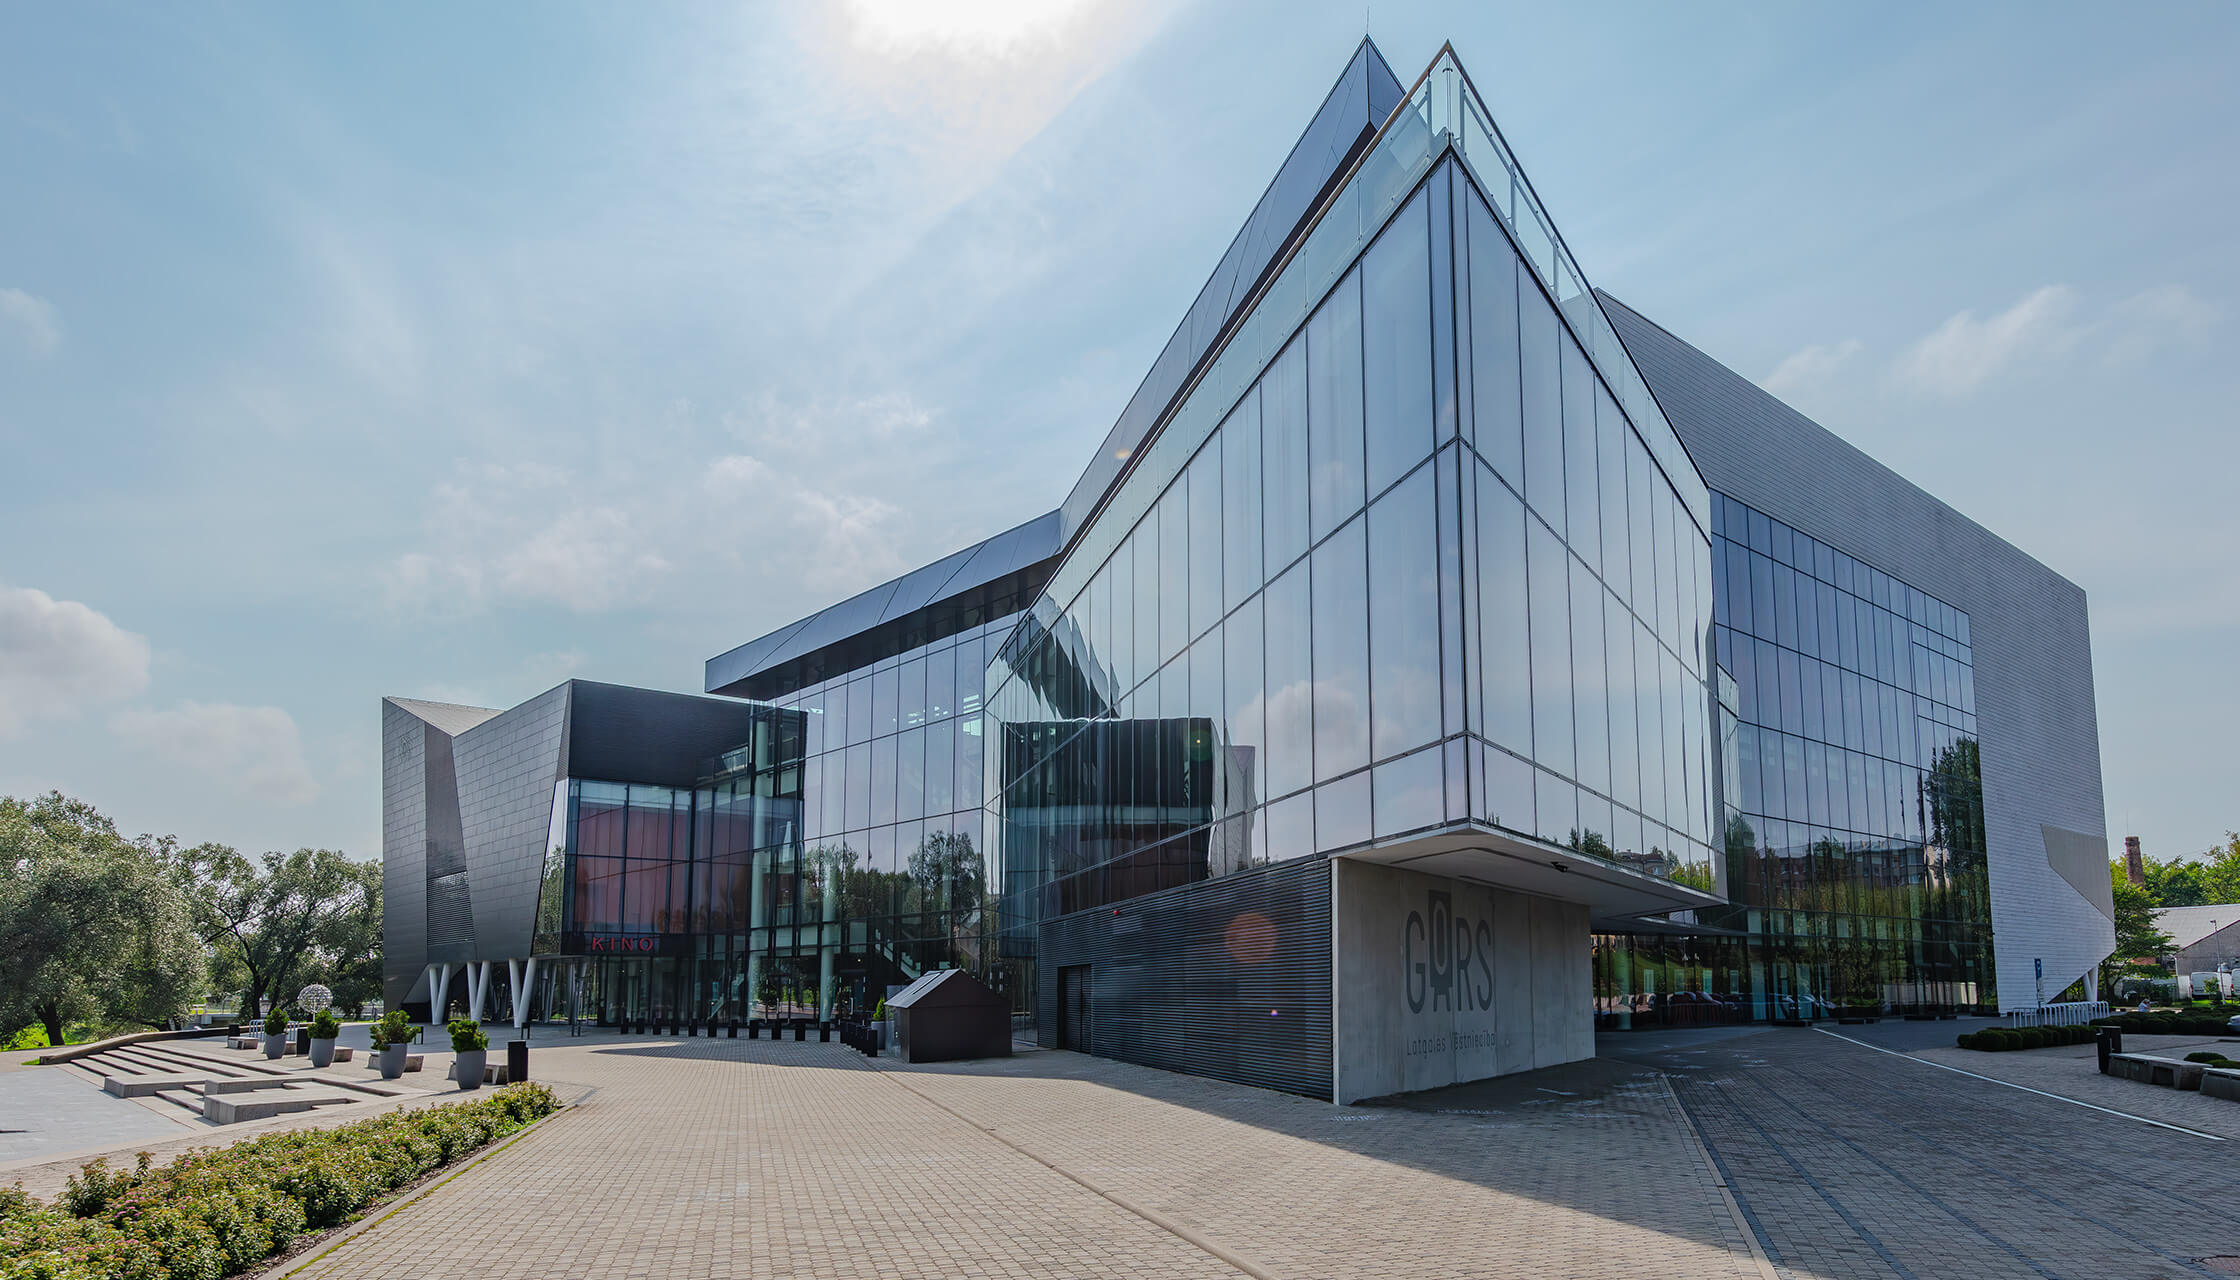 The multifunctional acoustic concert hall GORS in Rezekne